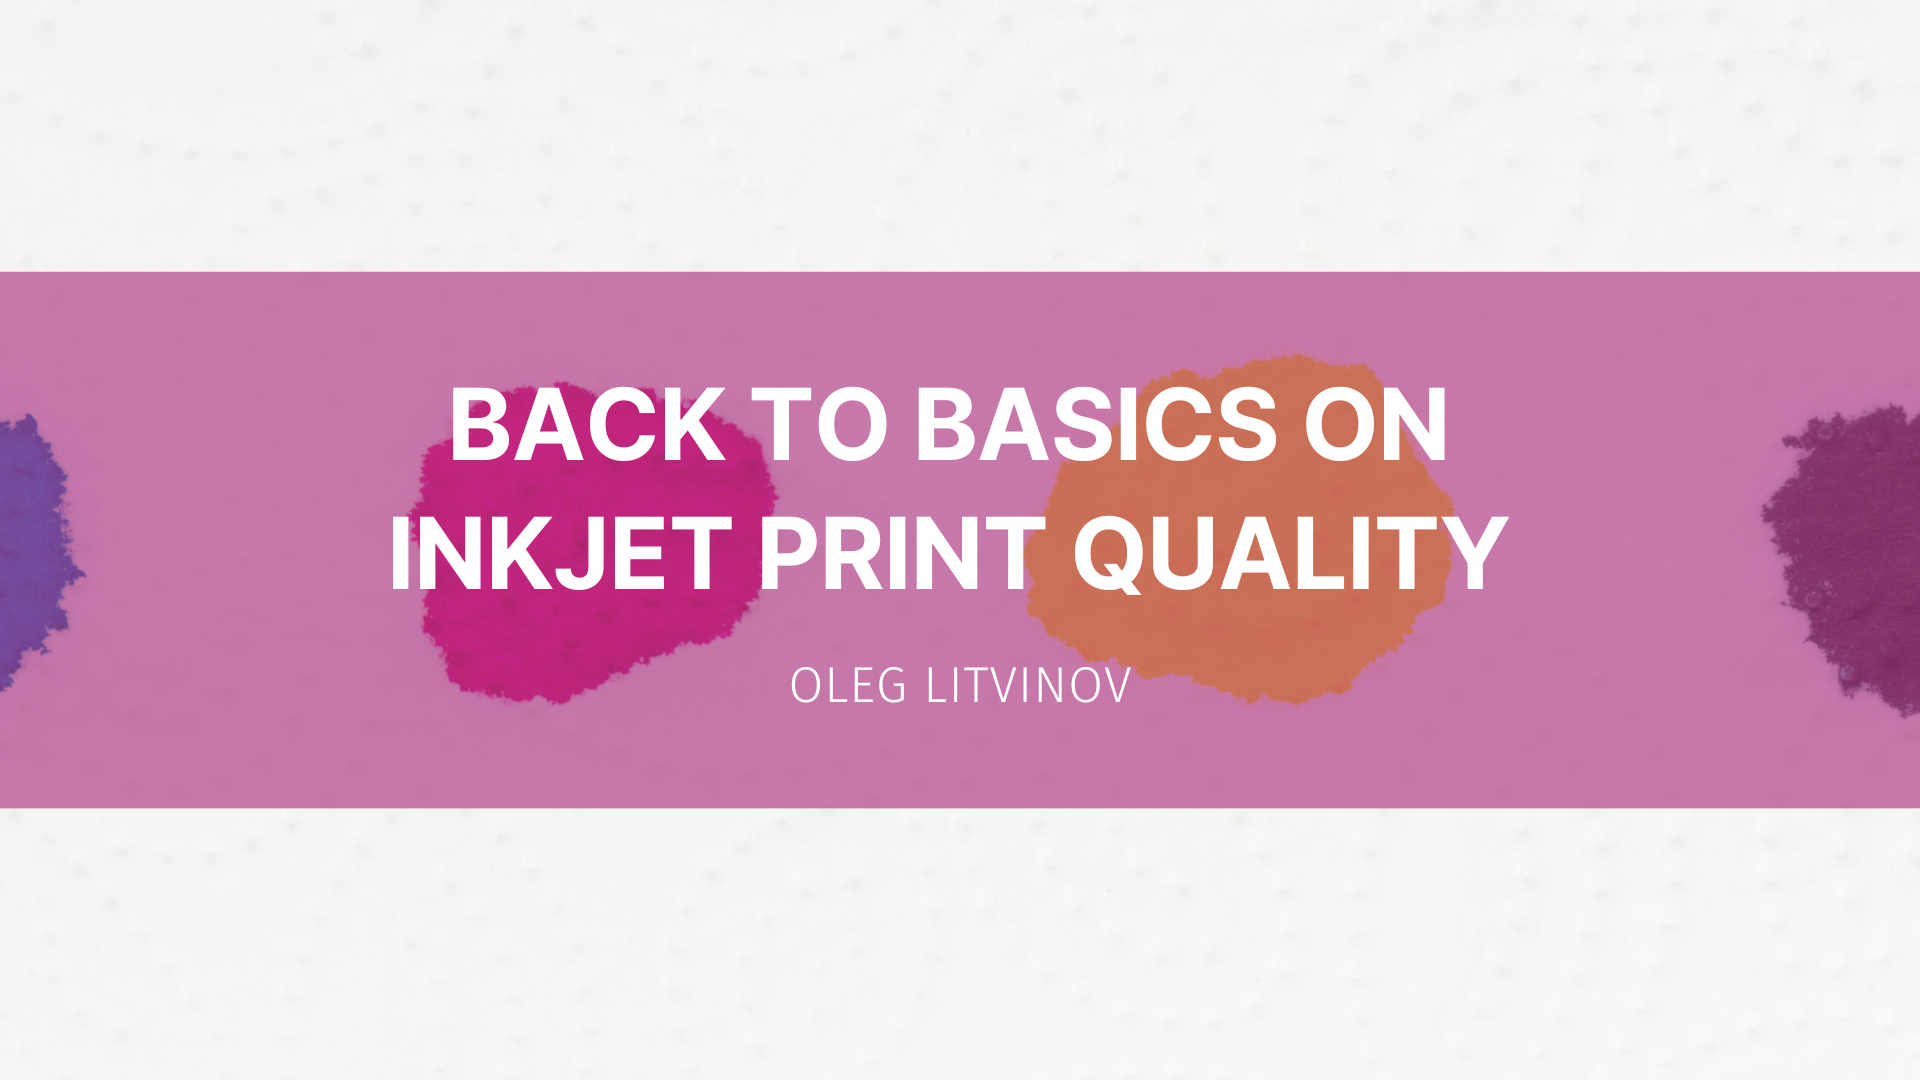 Featured image for “Back to Basics on Inkjet Print Quality”